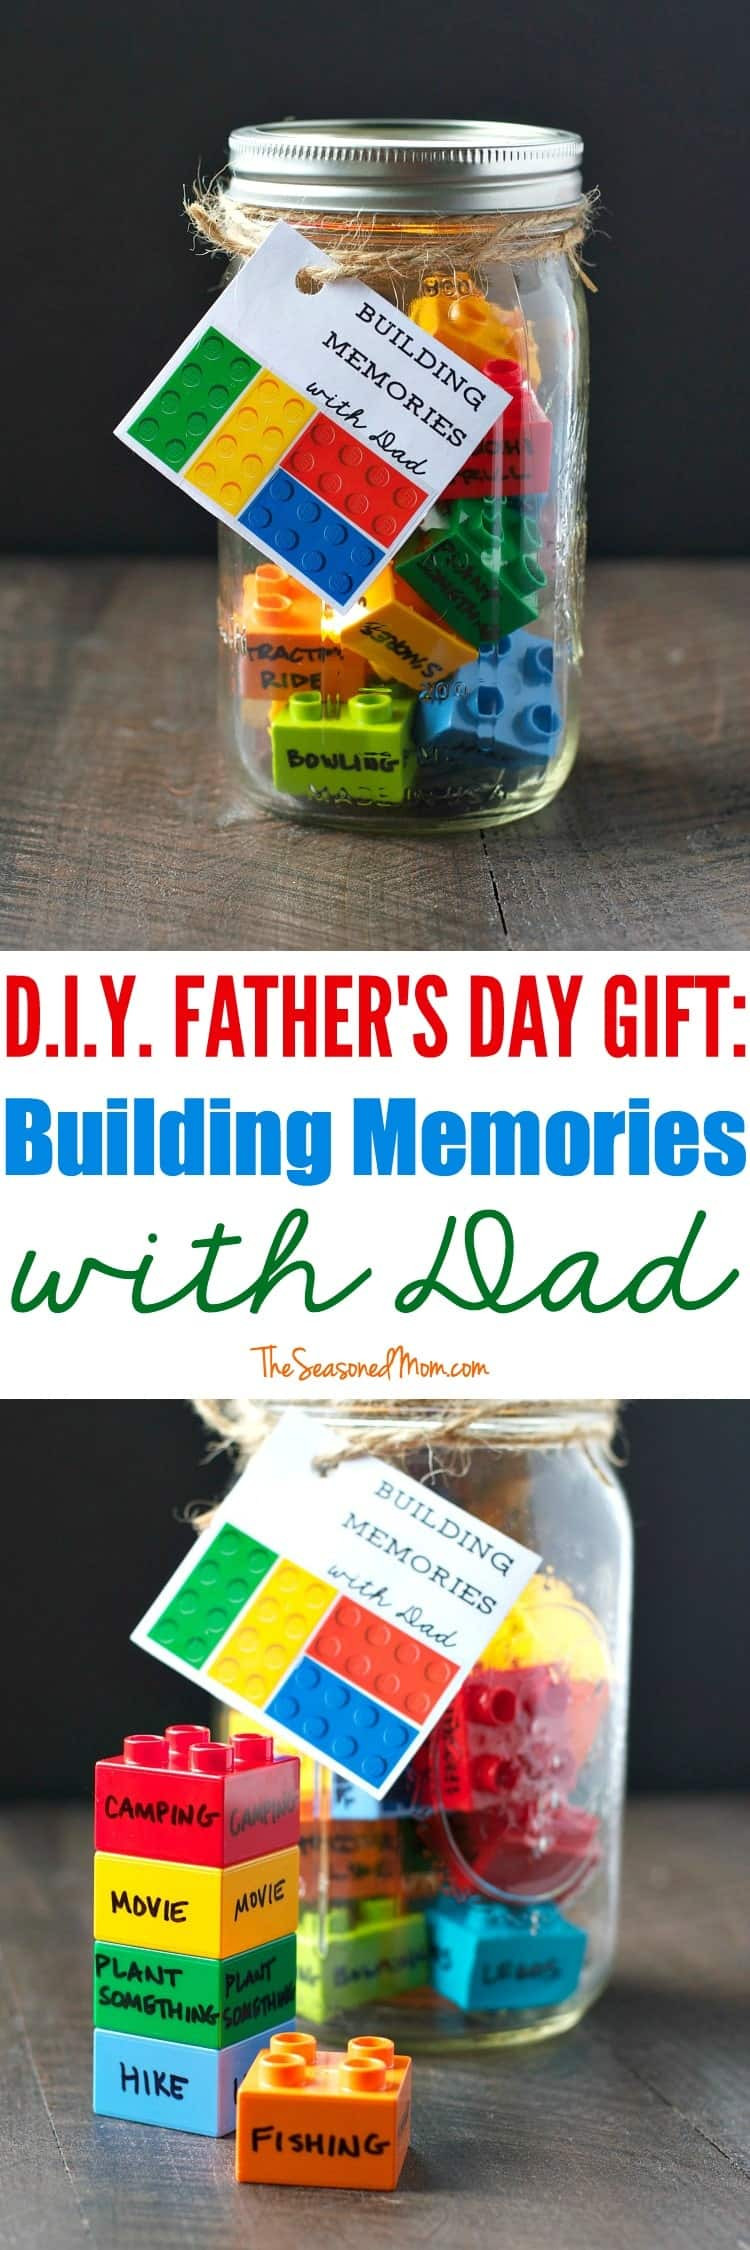 DIY Dad Gifts
 DIY Father s Day Gift Building Memories with Dad The